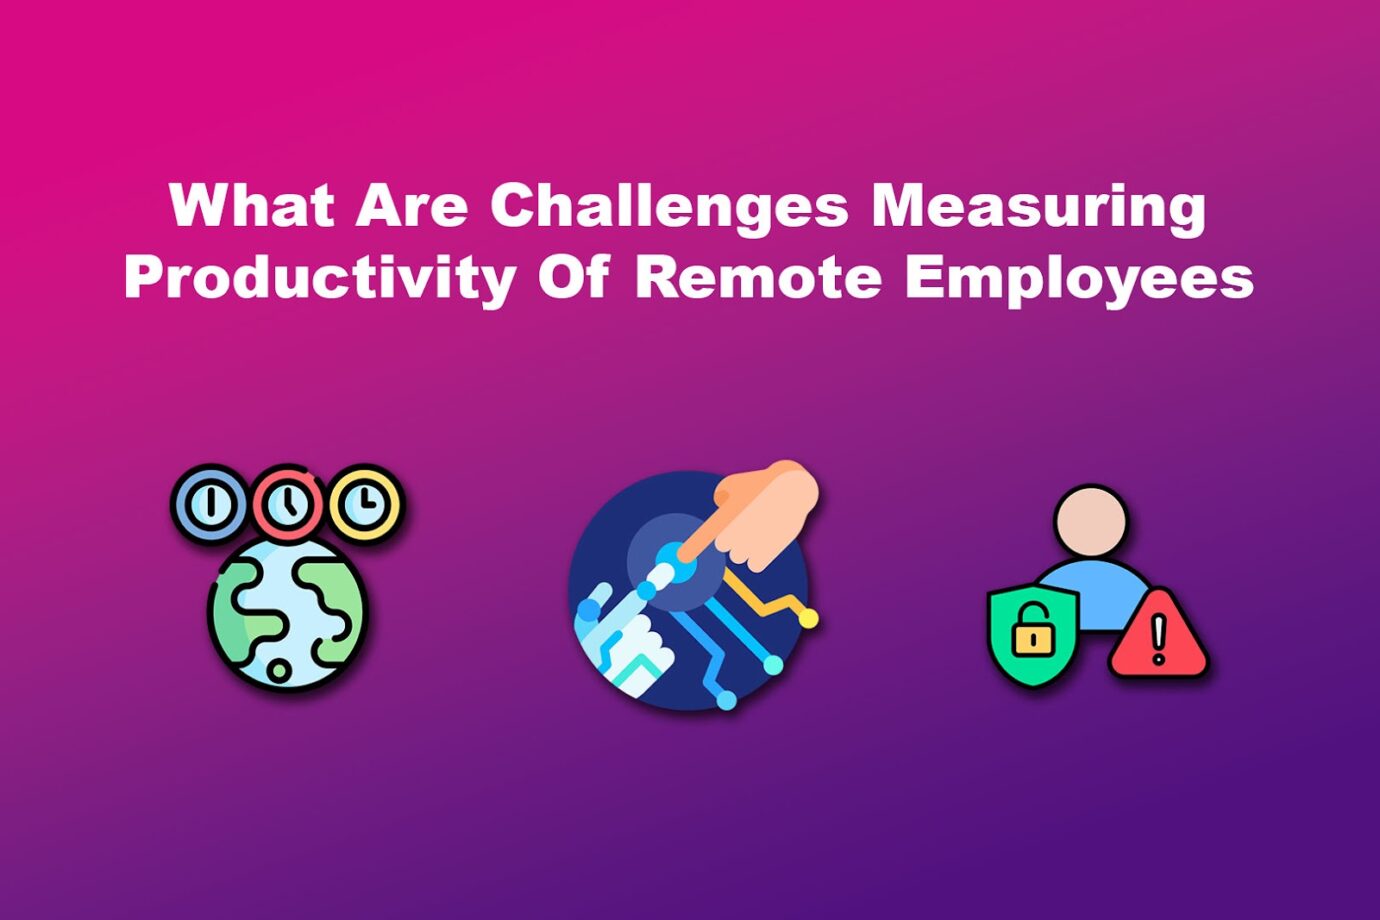 What Are Challenges Measuring Productivity Of Remote Employees